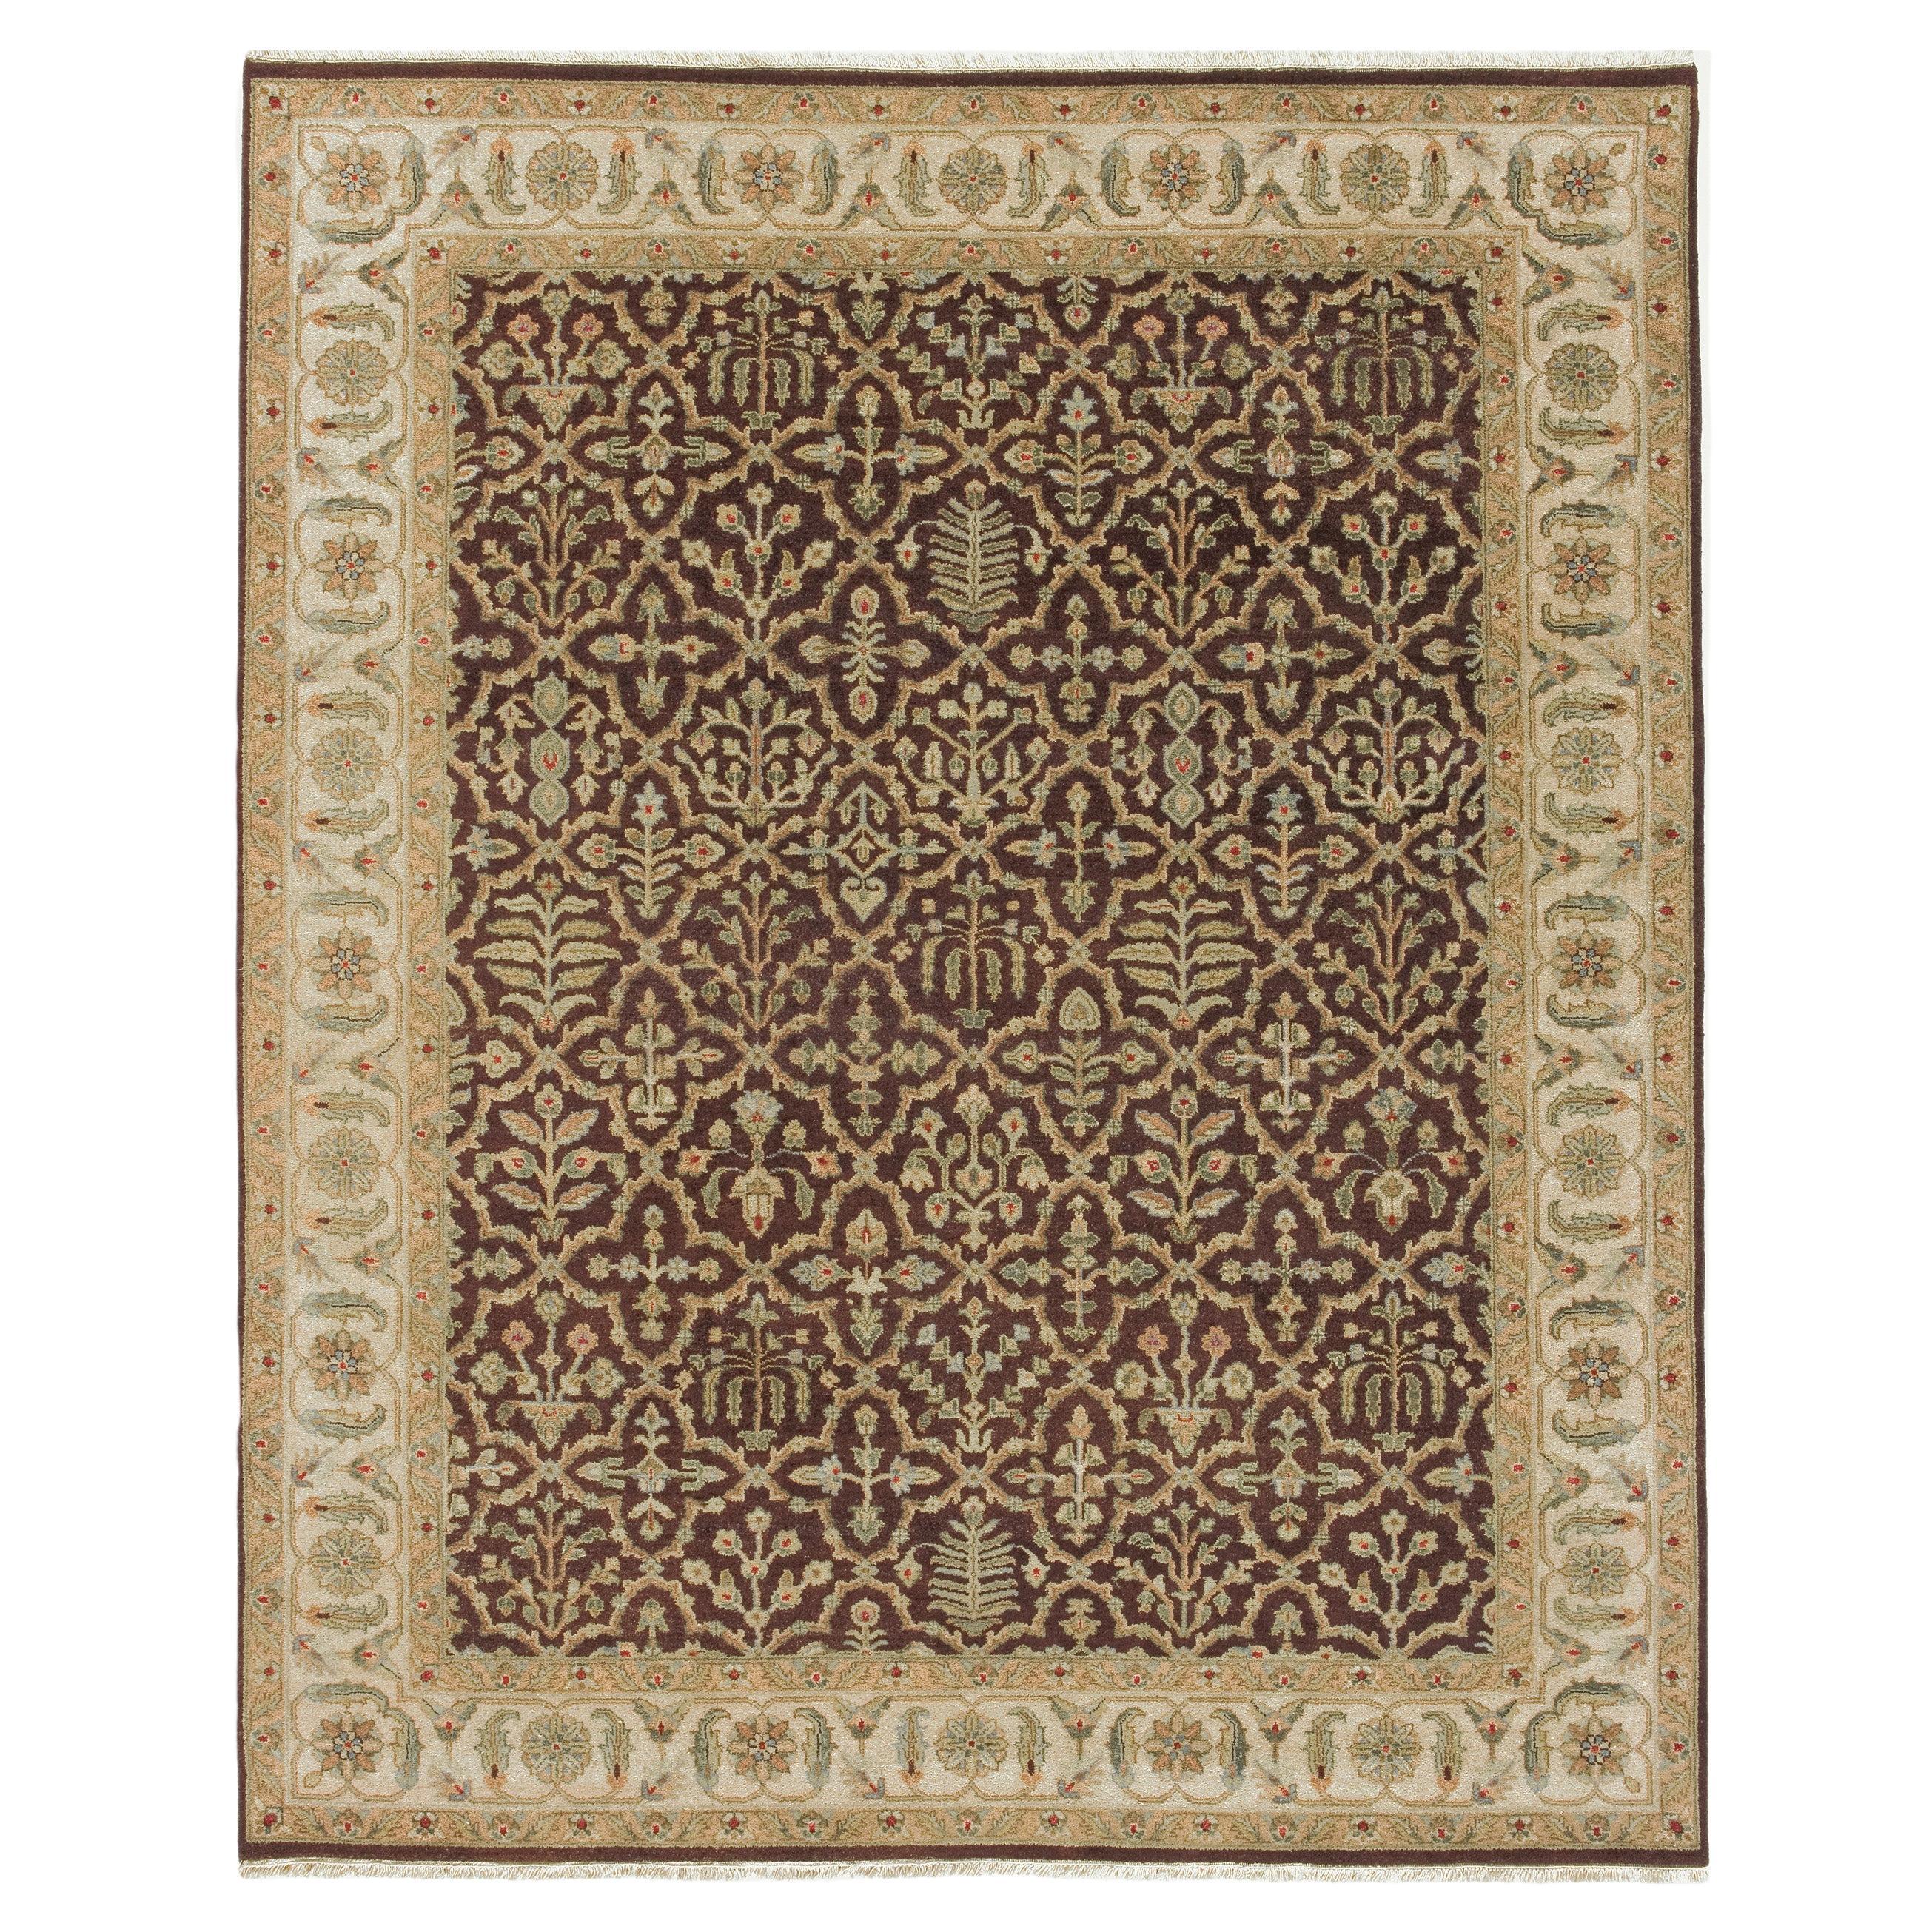 Luxury Traditional Hand-Knotted Bakhtiari Brown & Cream 11x19 Rug